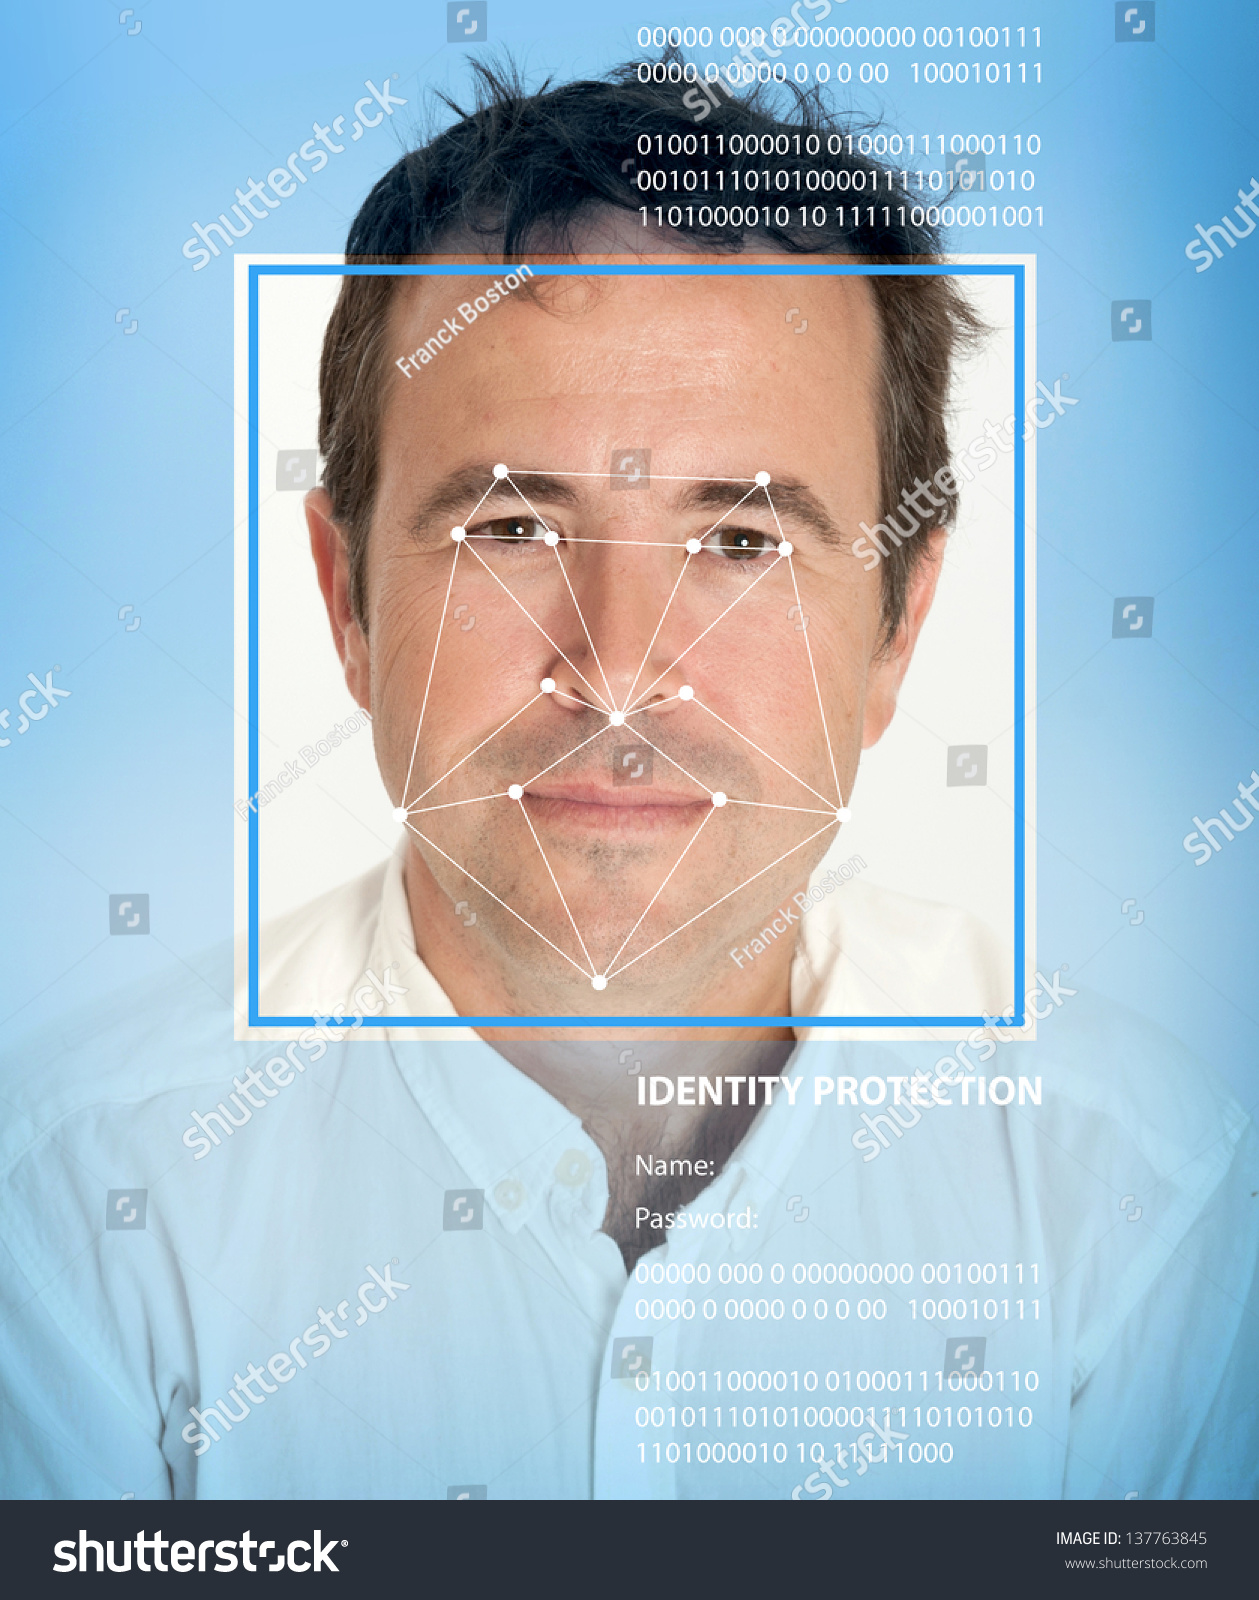 Man Face With Lines From A Facial Recognition Software Stock Photo 137763845 ...1259 x 1600